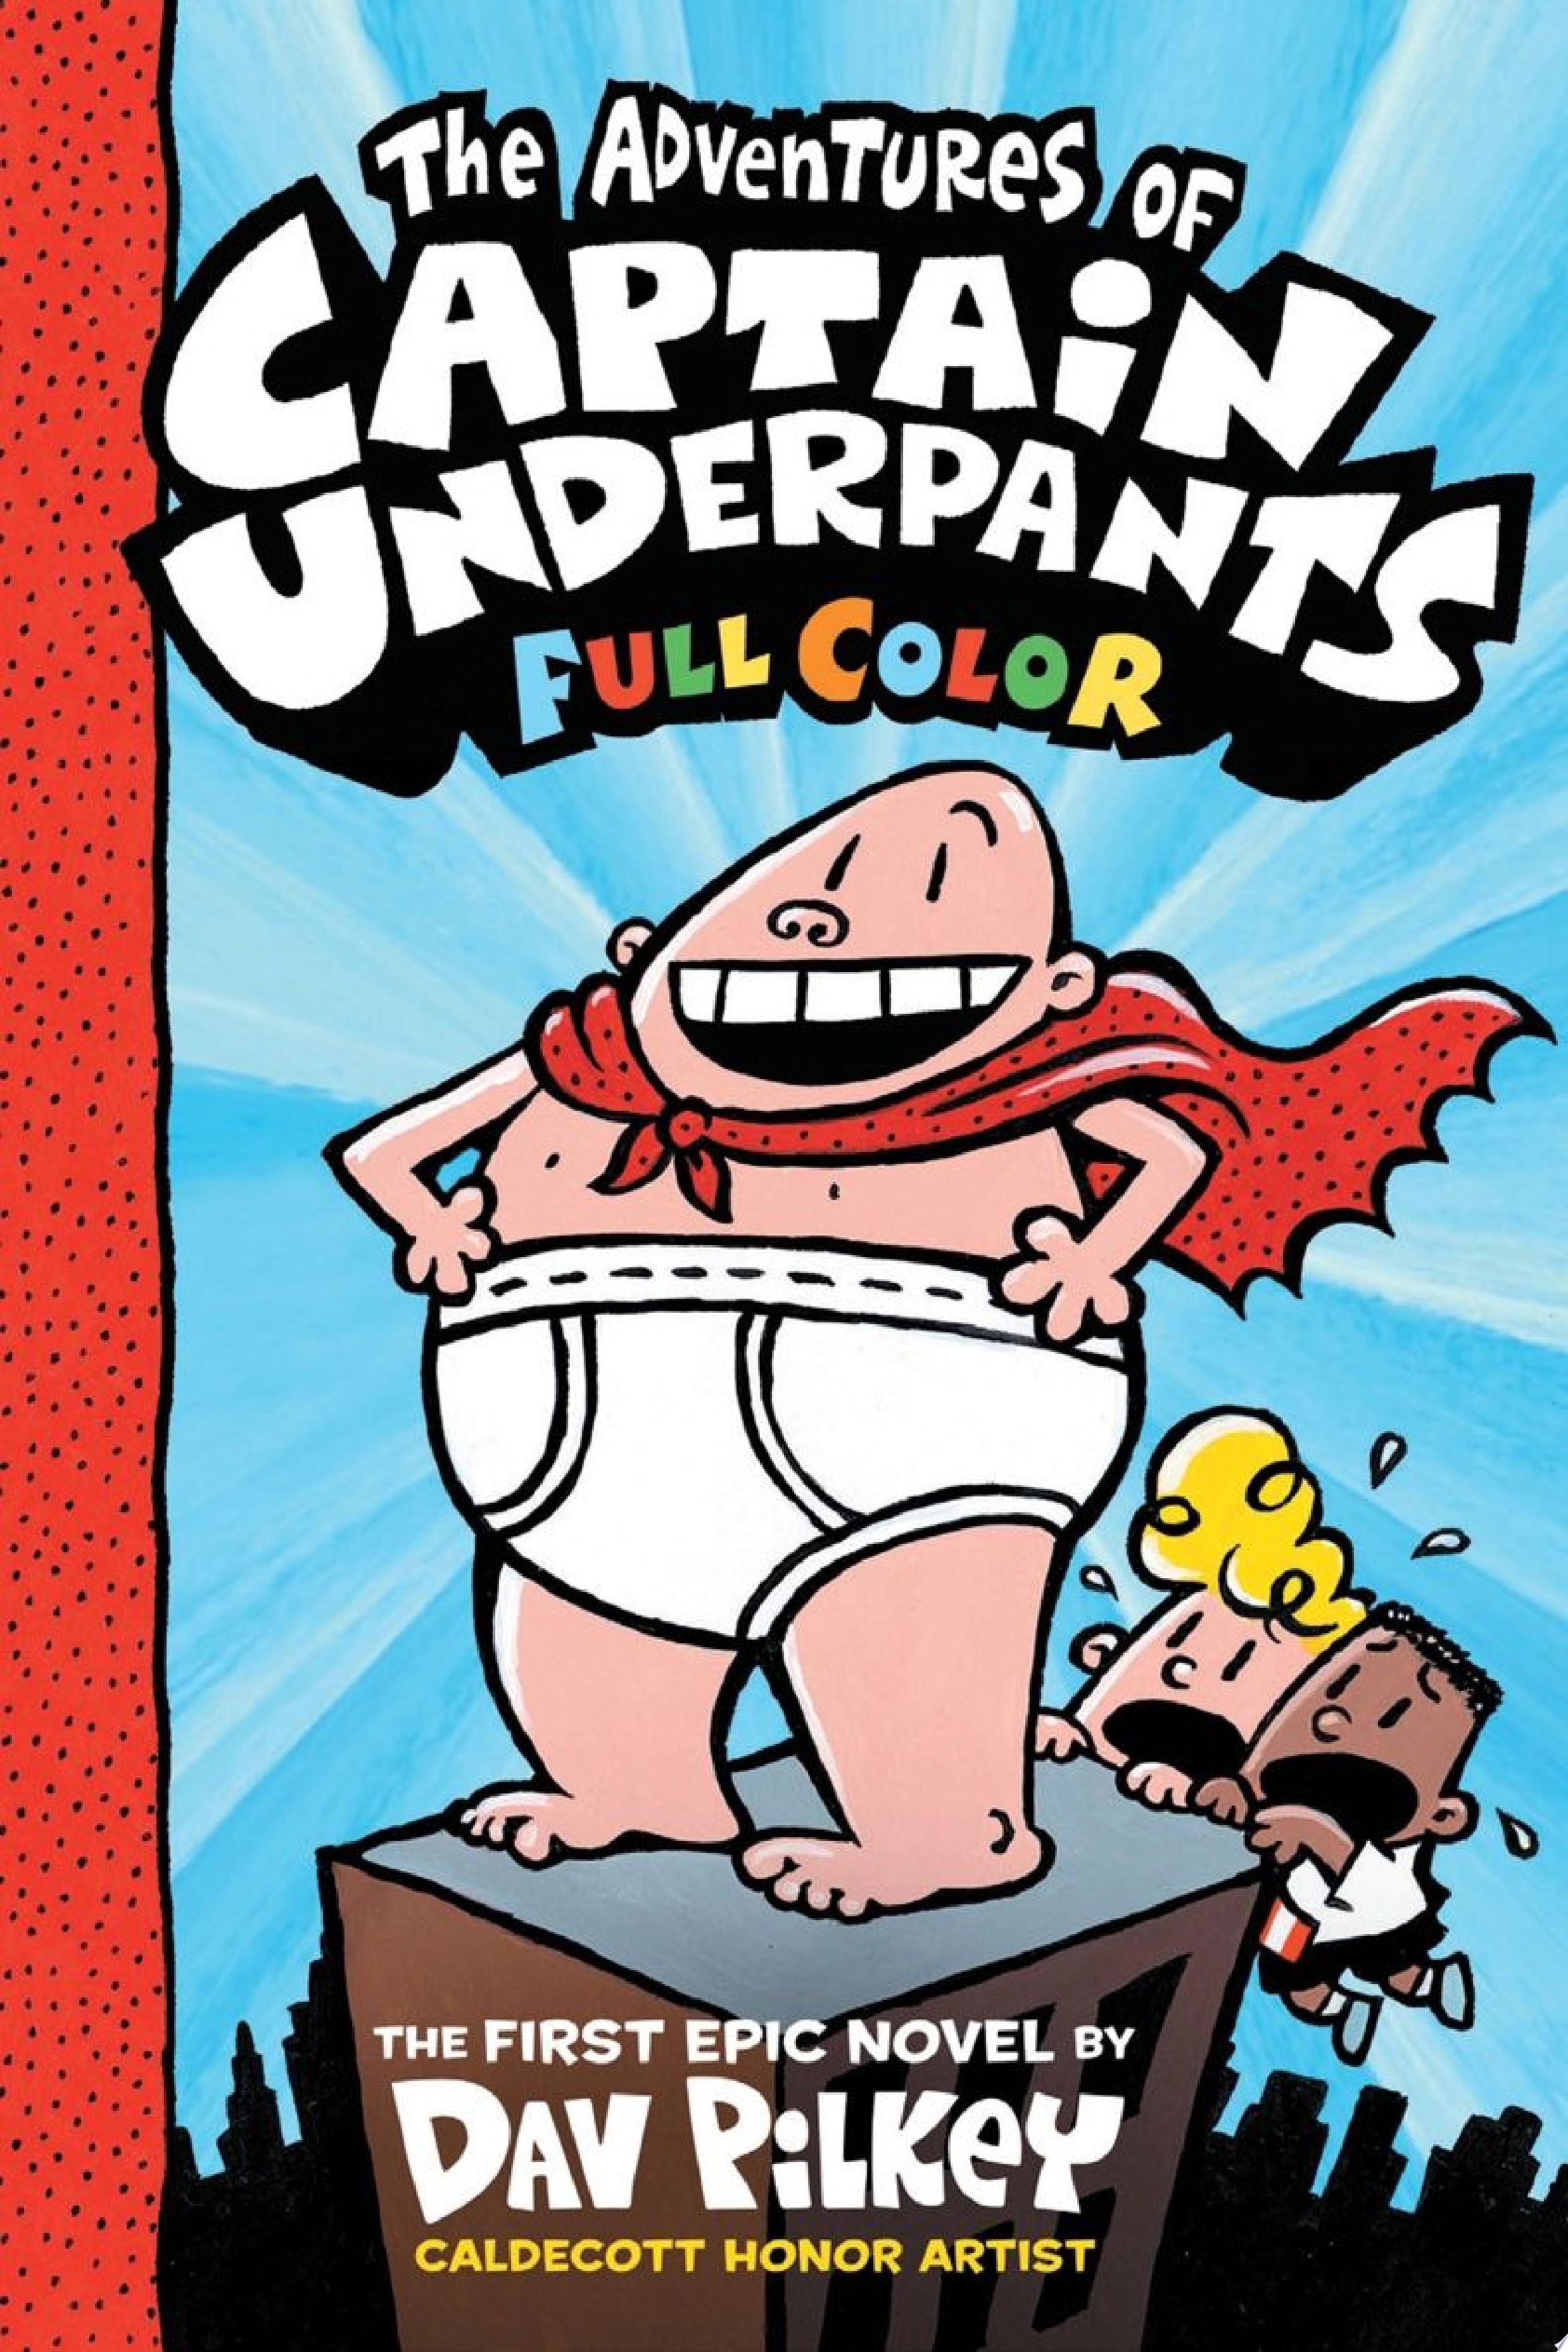 Image for "The Adventures of Captain Underpants: Color Edition (Captain Underpants #1) (Color Edition)"